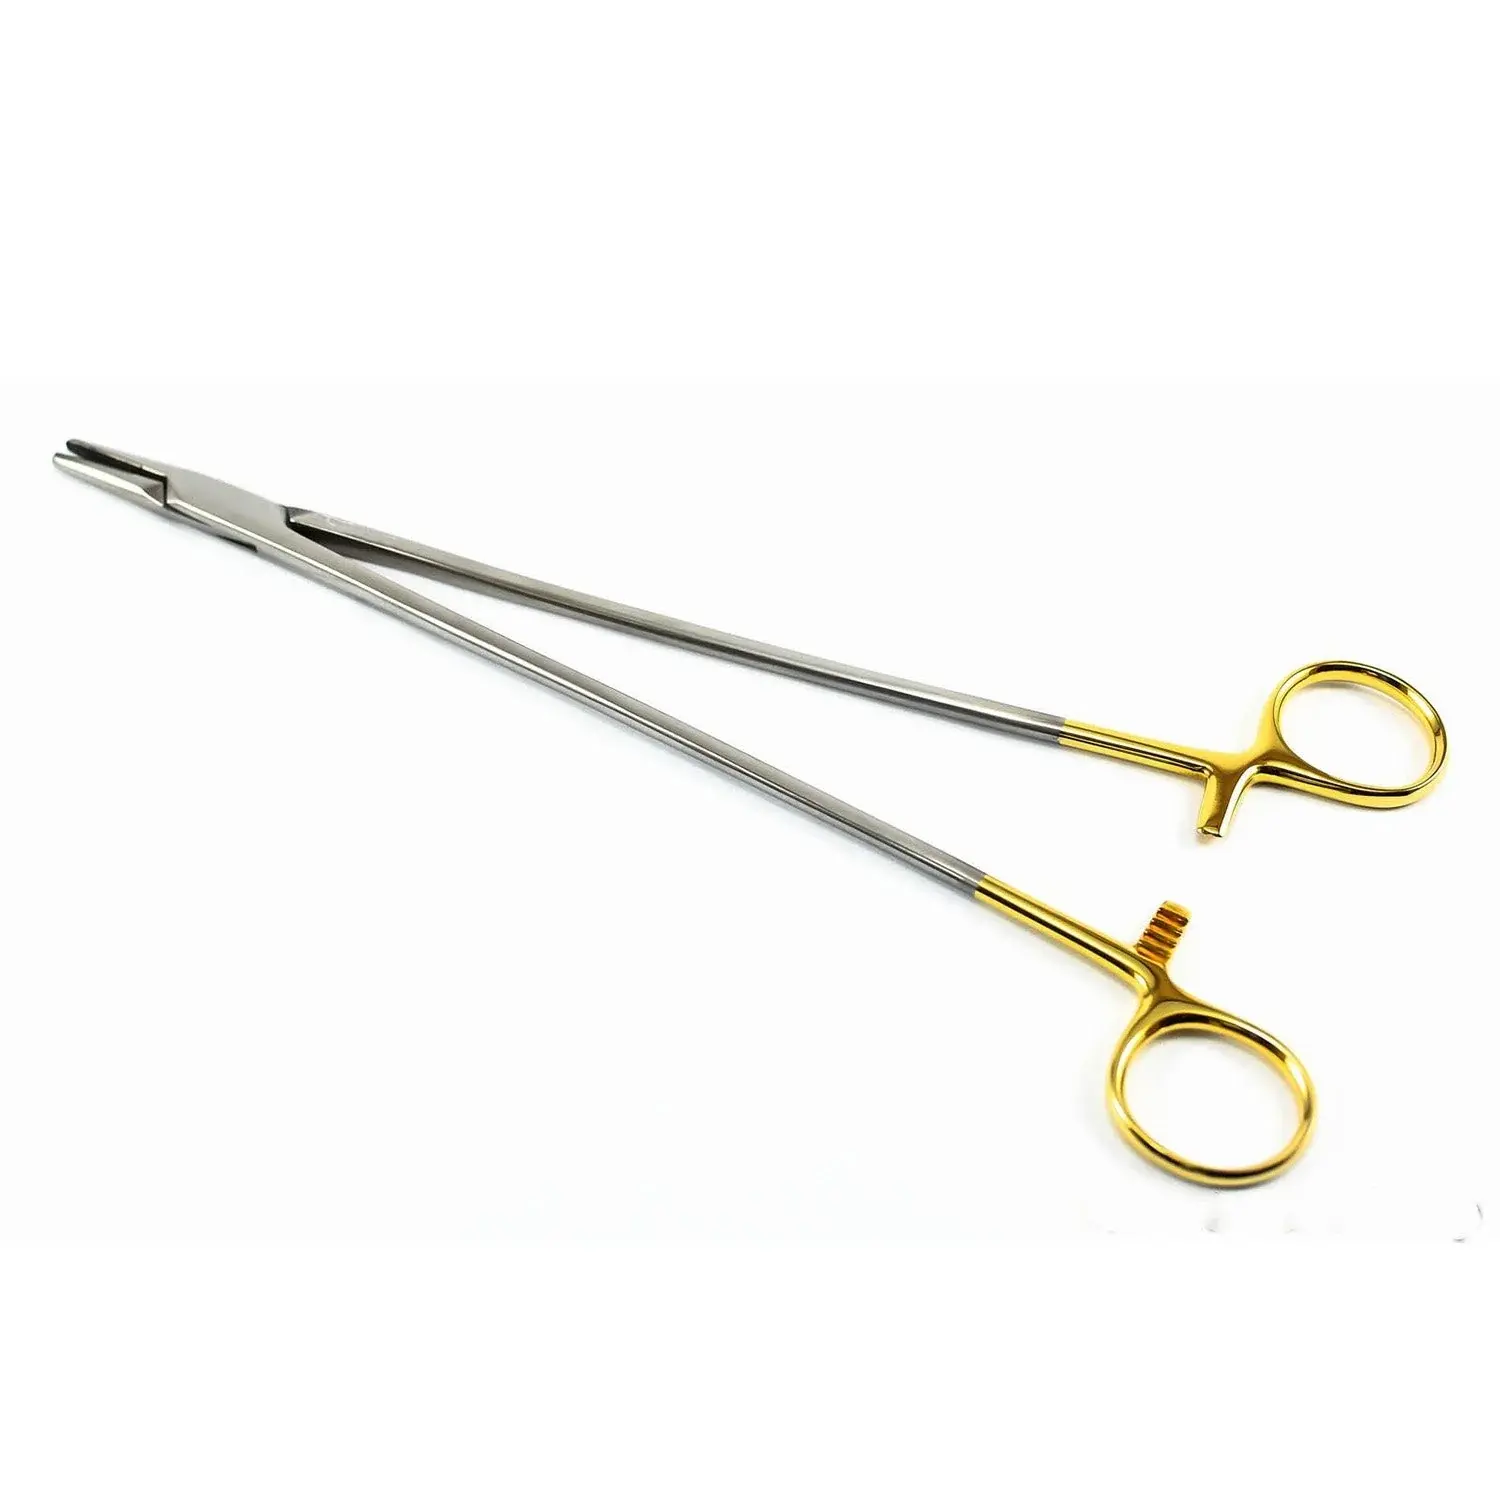 Professional Medical Devices Surgical Orthopedic Instruments Wagenstein Needle Holder 10inches From Indian Exporter